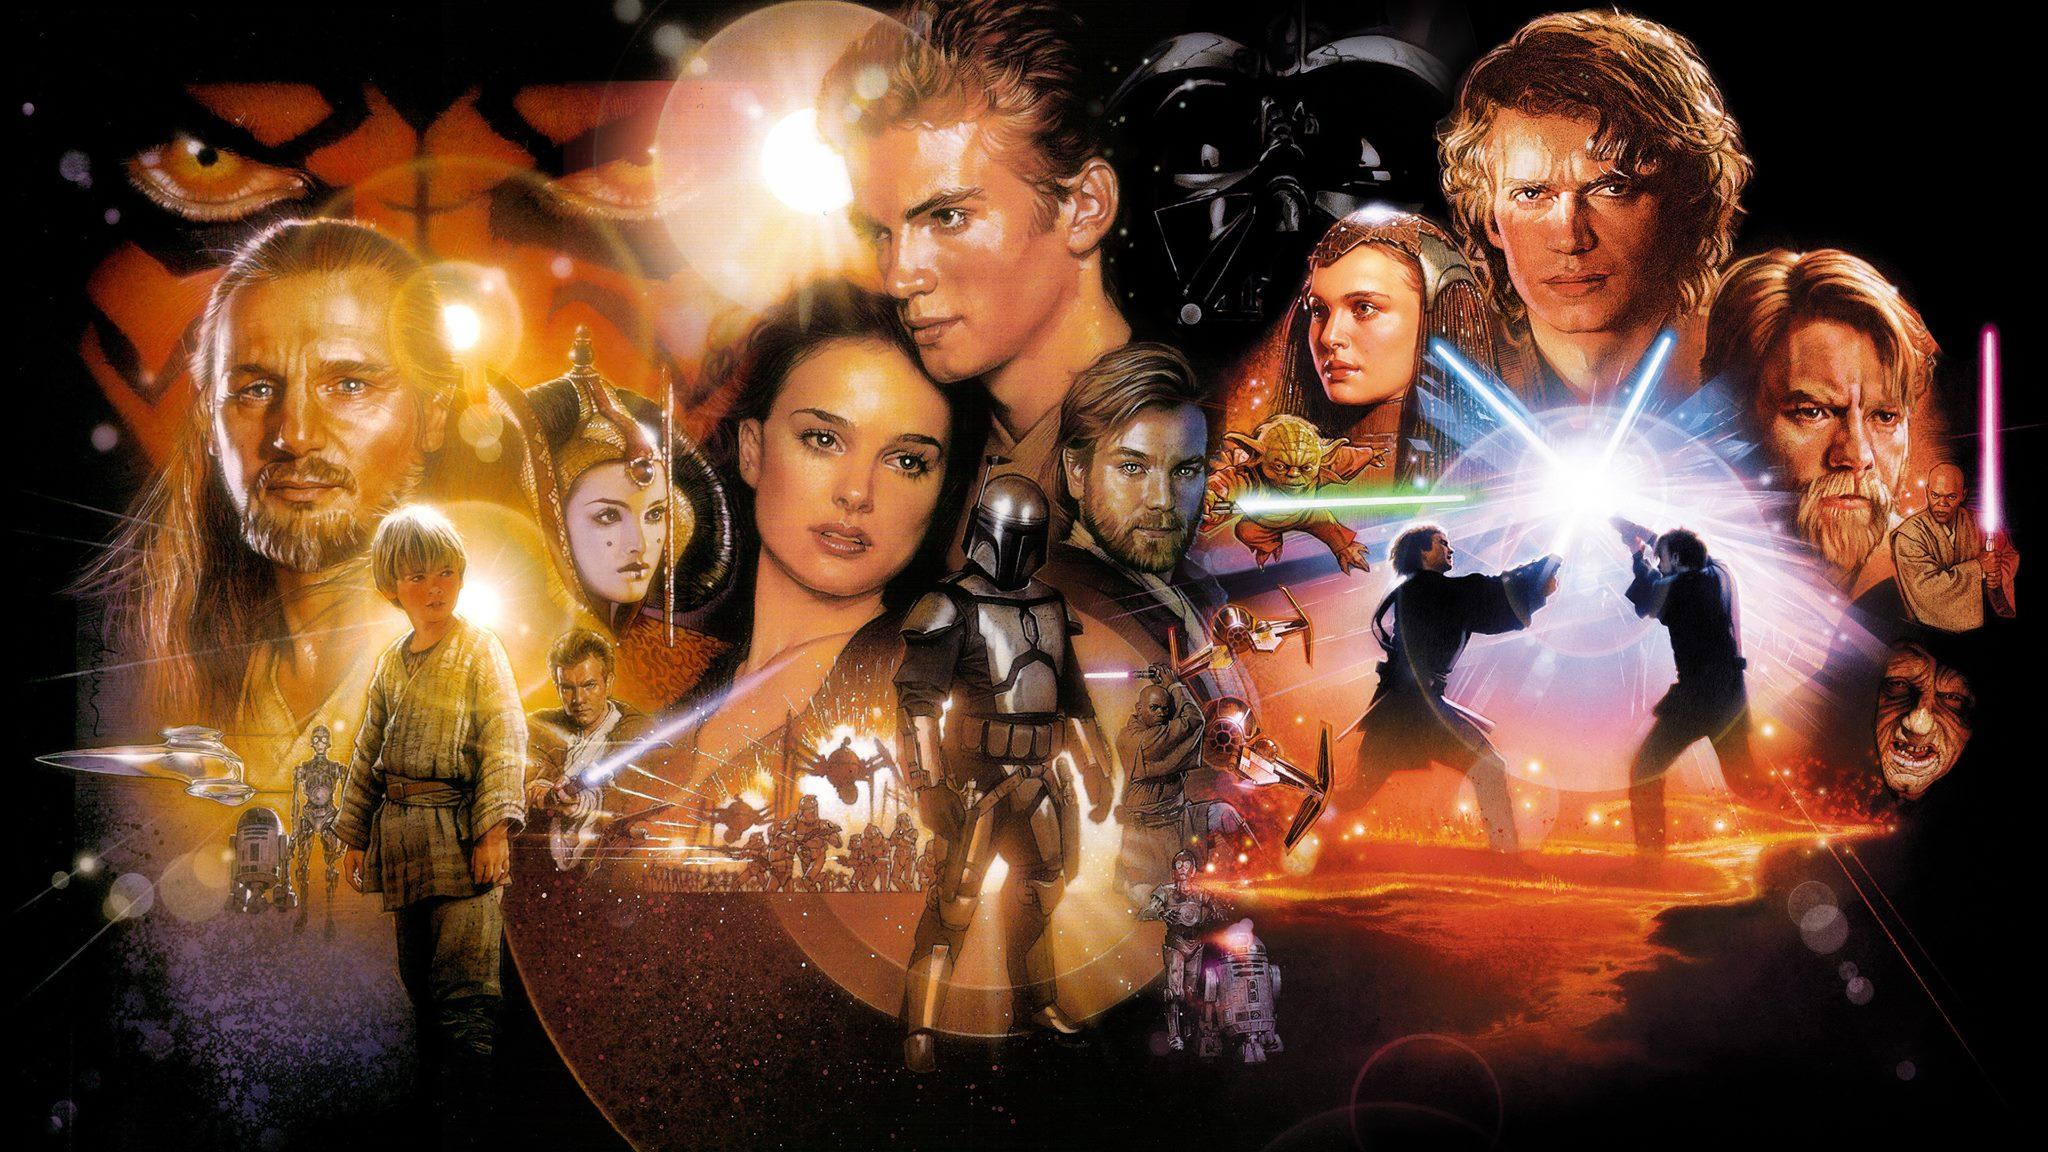 A graphic that combines the three posters from the Star Wars prequel trilogy, featuring Anakin and Padme at the centre.